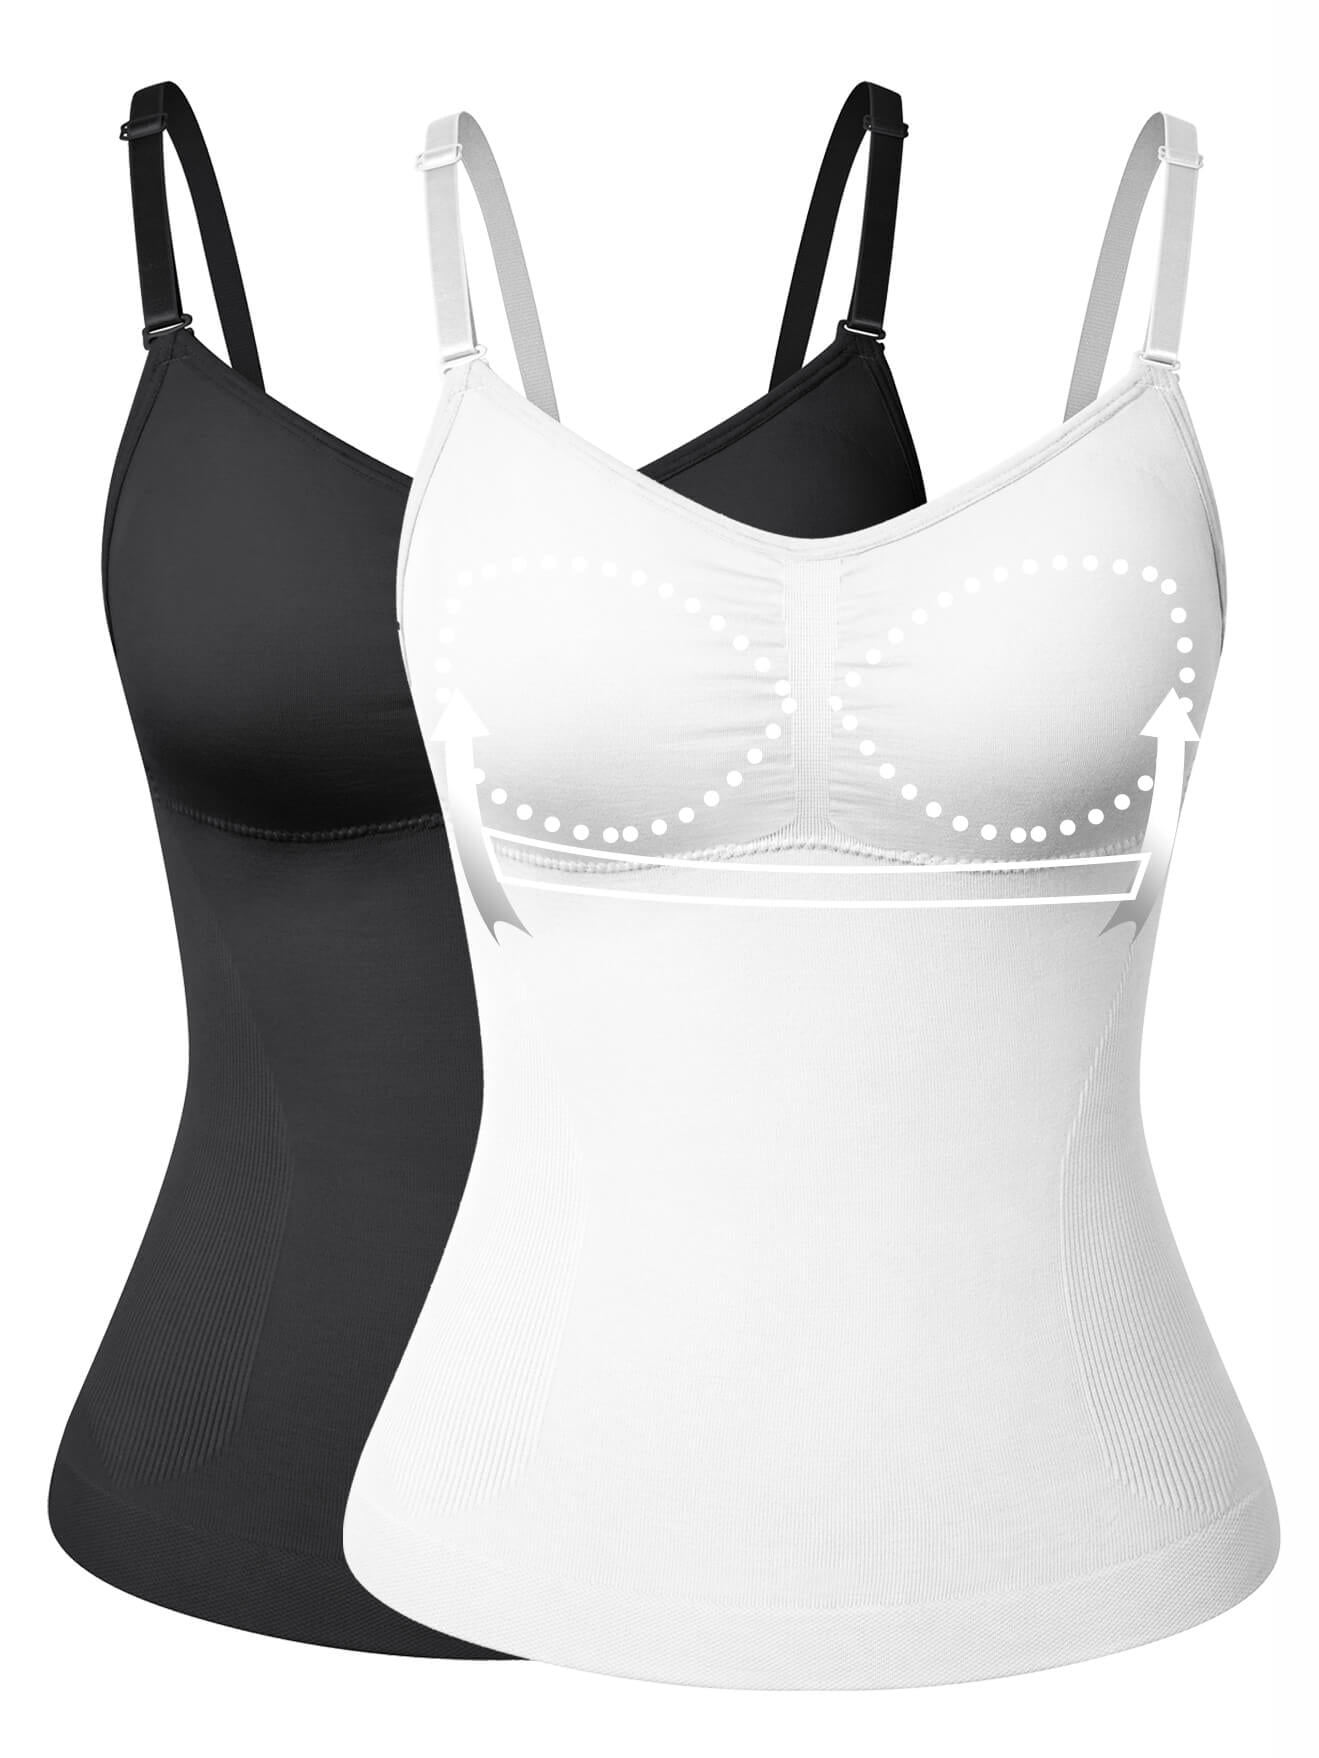 2 Packs Shapewear Camisoles with Built in Padded Bras Tummy